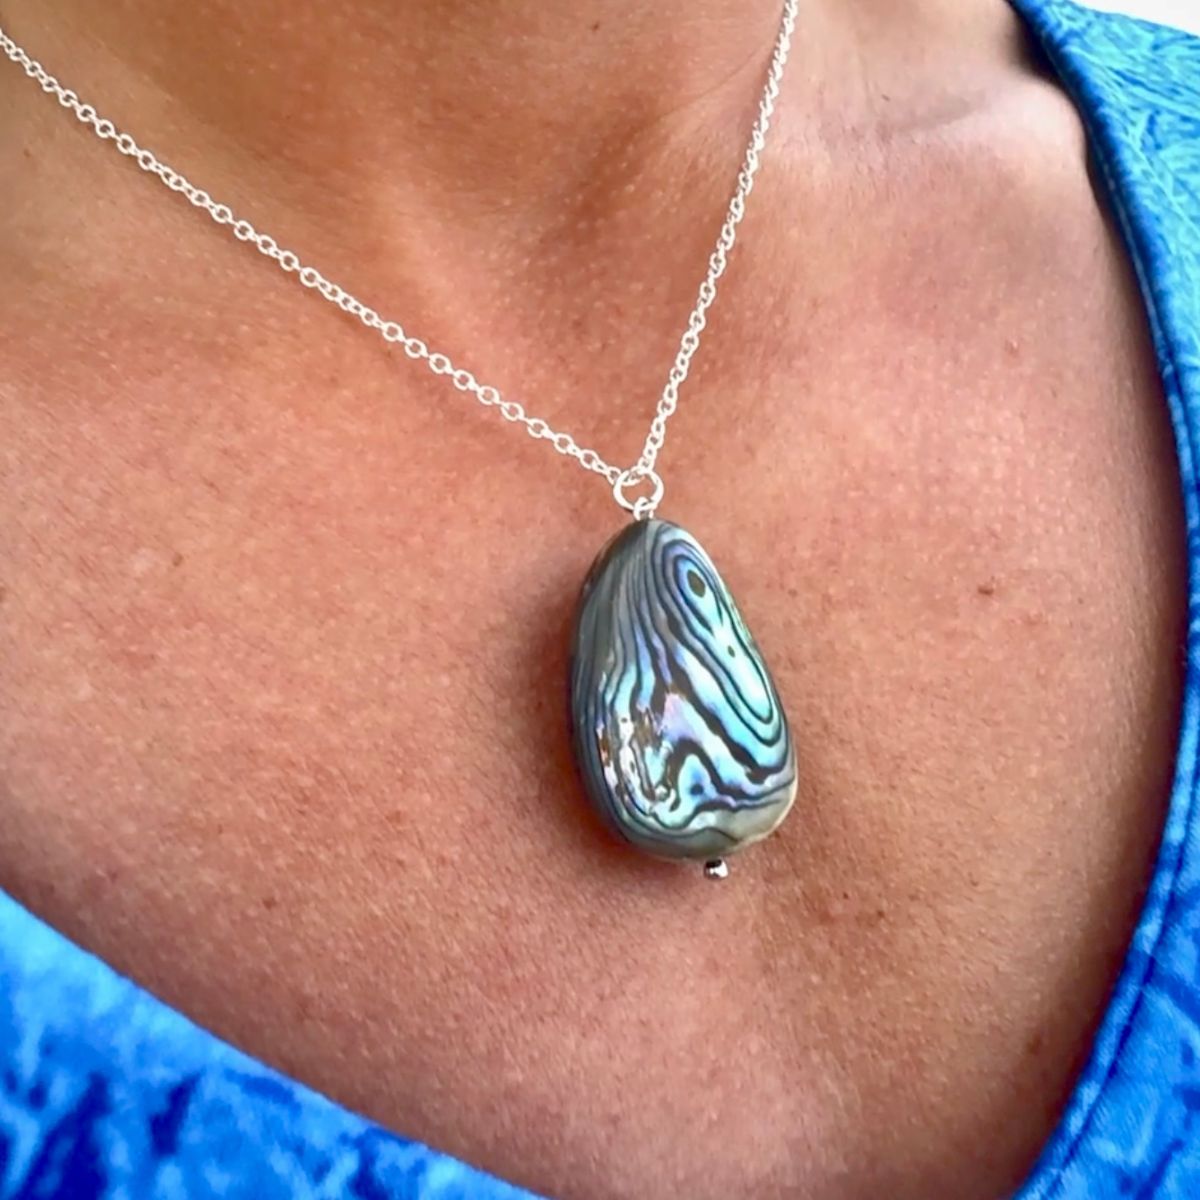 "Coastal Treasures" is a necklace that celebrates the raw and untamed beauty of nature. 